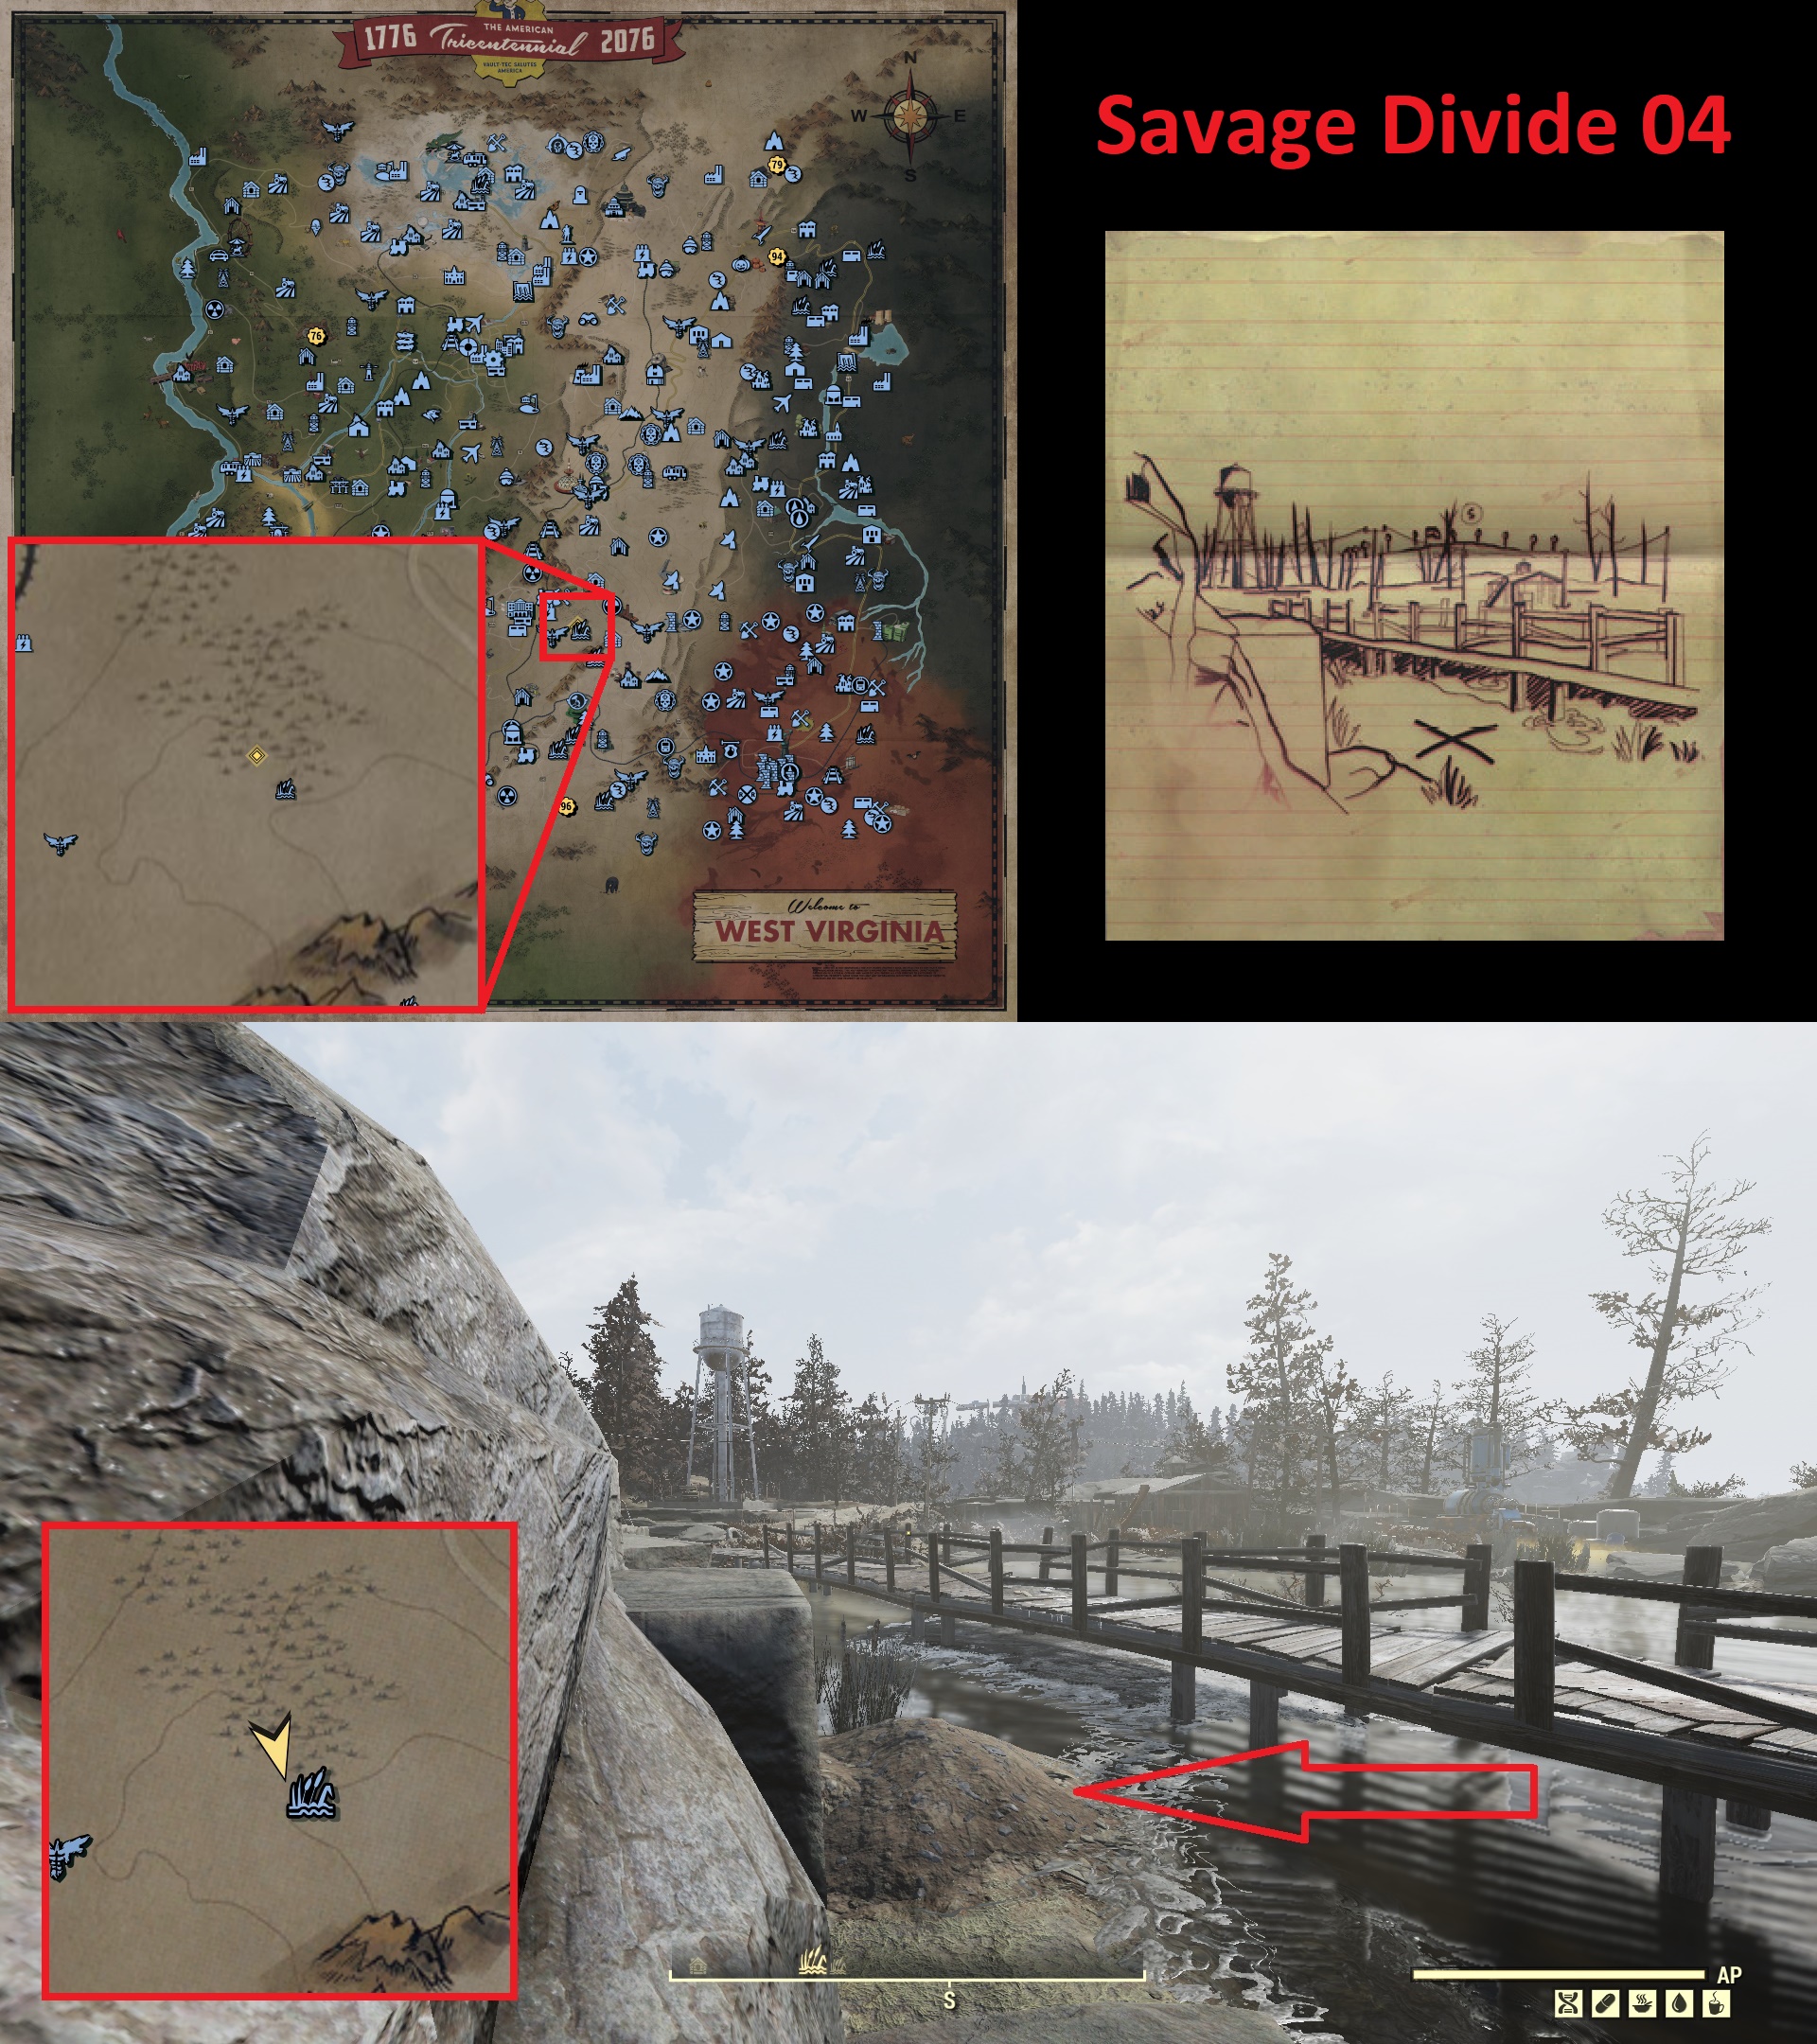 Fallout 76 Treasure Map Locations - Savage Divide 04 - 82EE0D3